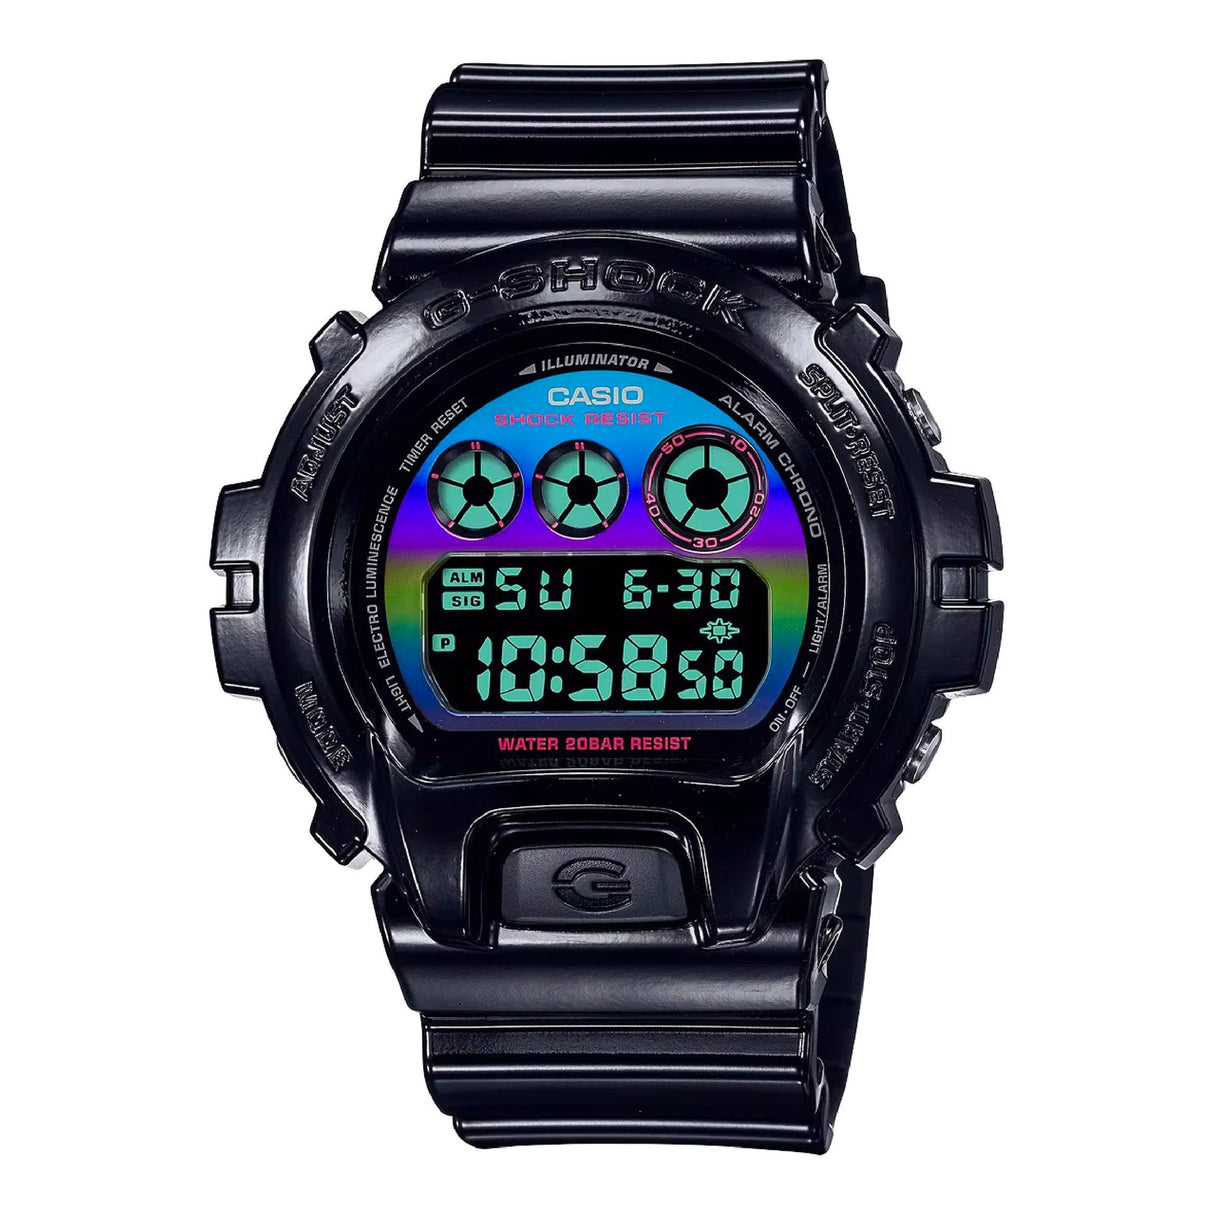 Casio Men's Digital Watch (Large) Big & Bold Digital (50mm) Digital Display with Casio Logo Plastic Case & Strap Quartz Movement Easy to Read Display Everyday Functionality (Optional: List features like Time, Date, Alarm, Stopwatch) Comfortable & Lightweight Durable Men's Watch Design Original Packaging